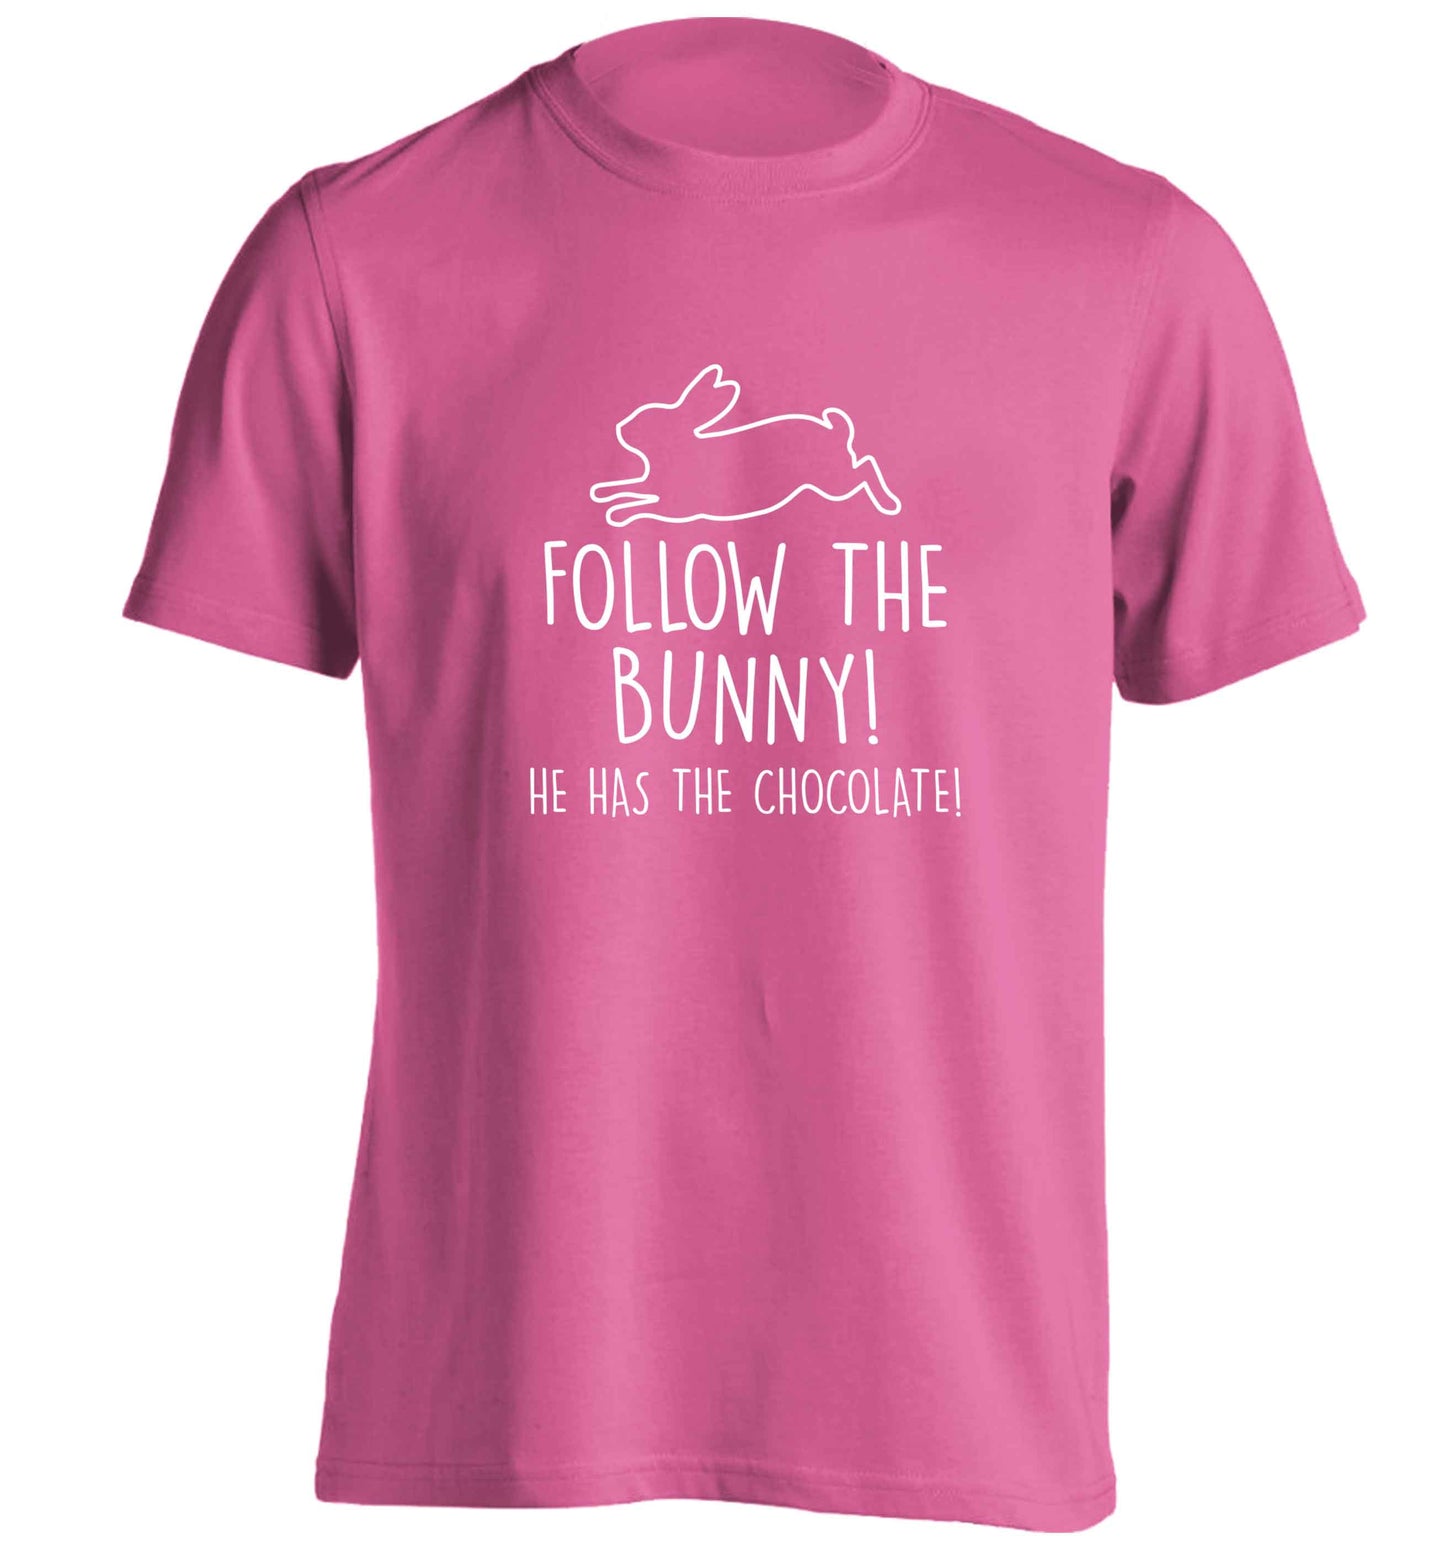 Follow the bunny! He has the chocolate adults unisex pink Tshirt 2XL